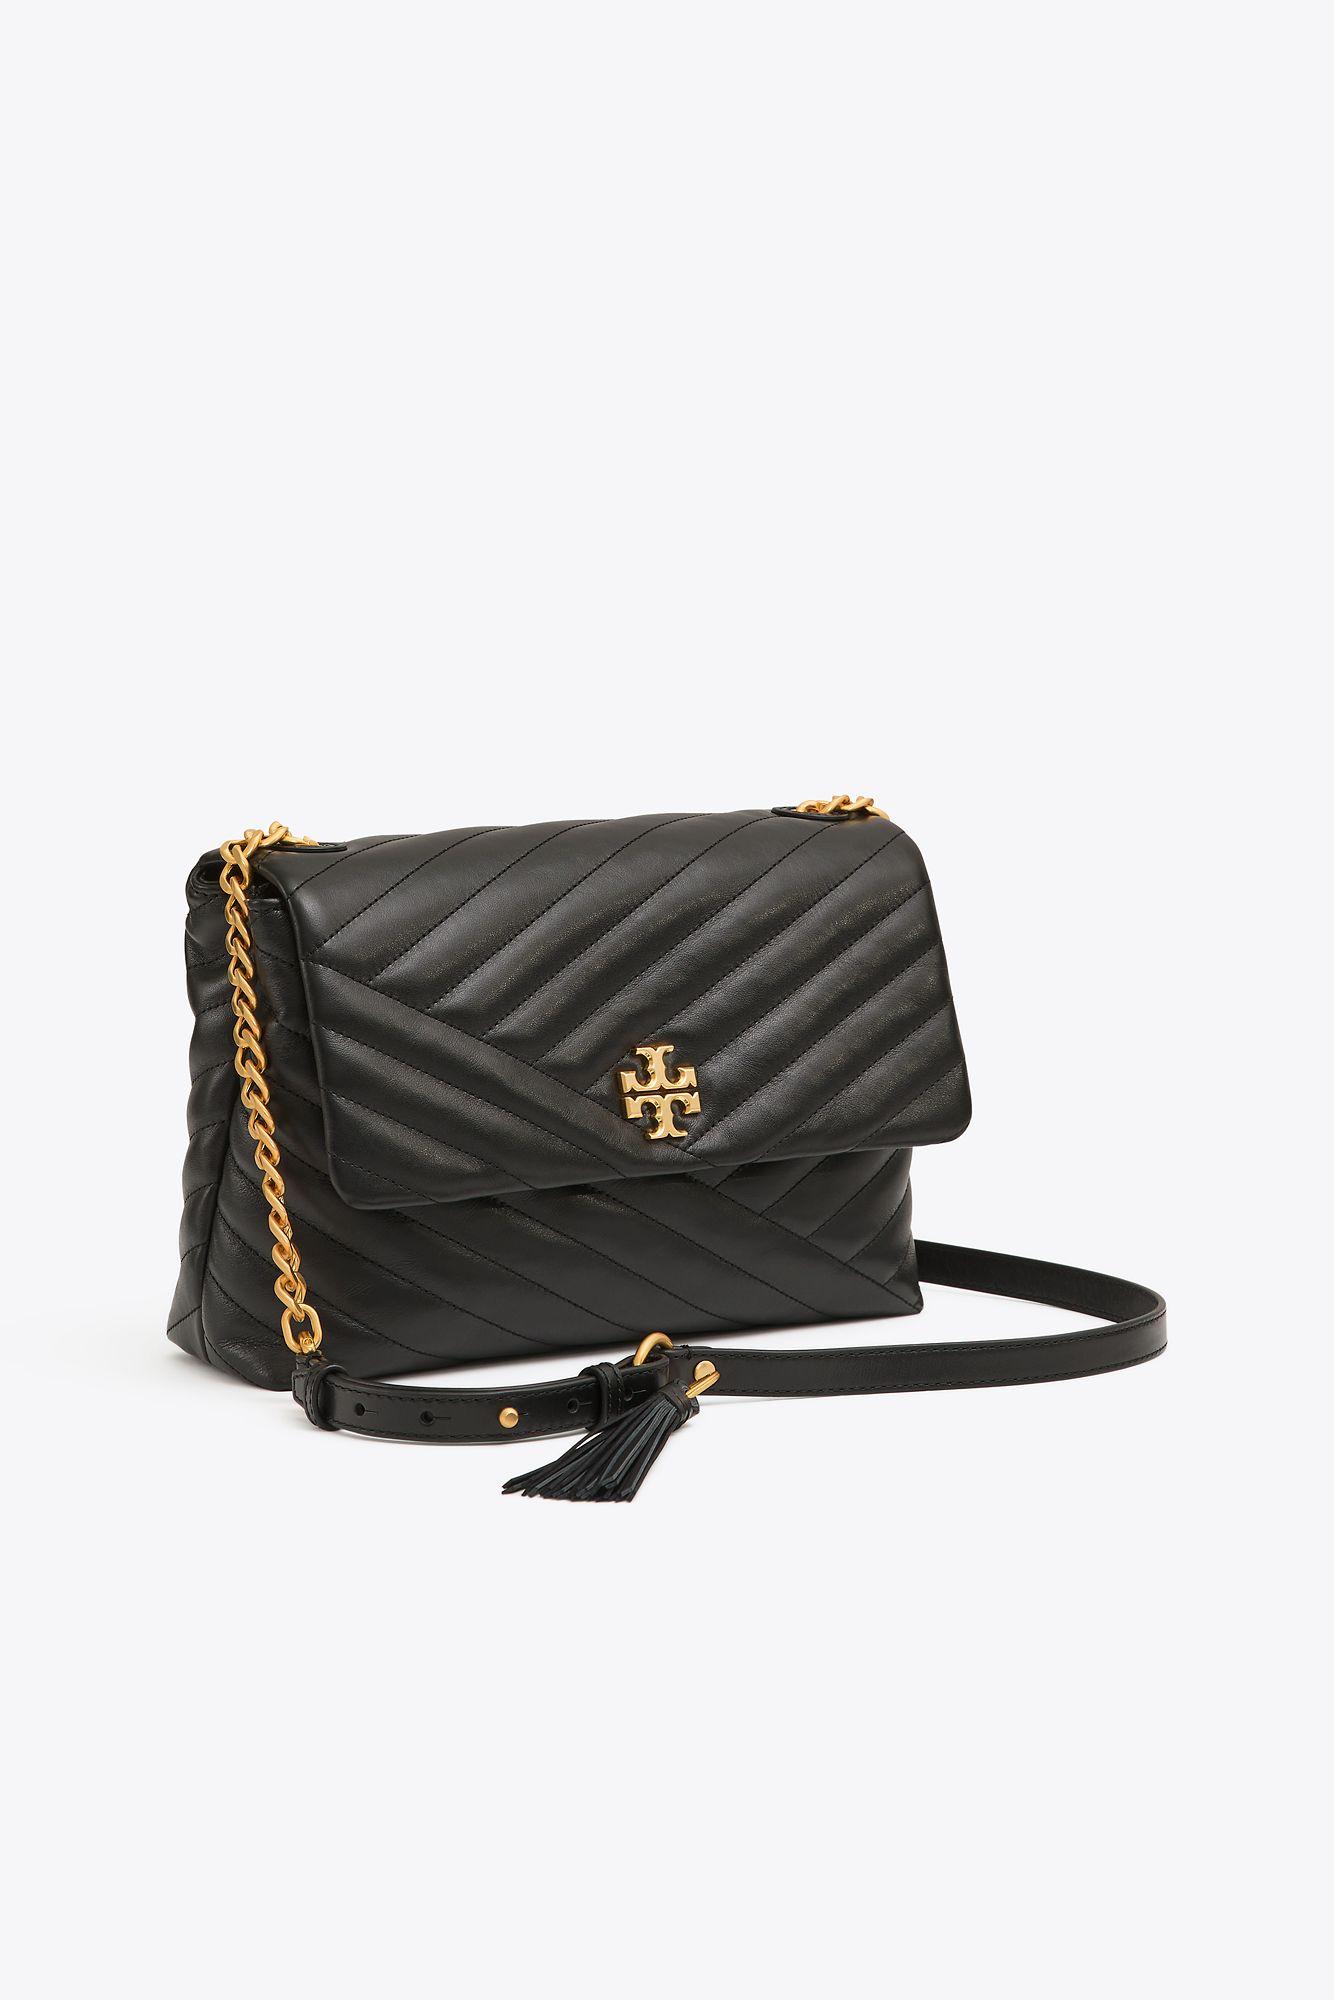 Tory Burch Kira Quilted Leather Shoulder Bag in Black - Lyst